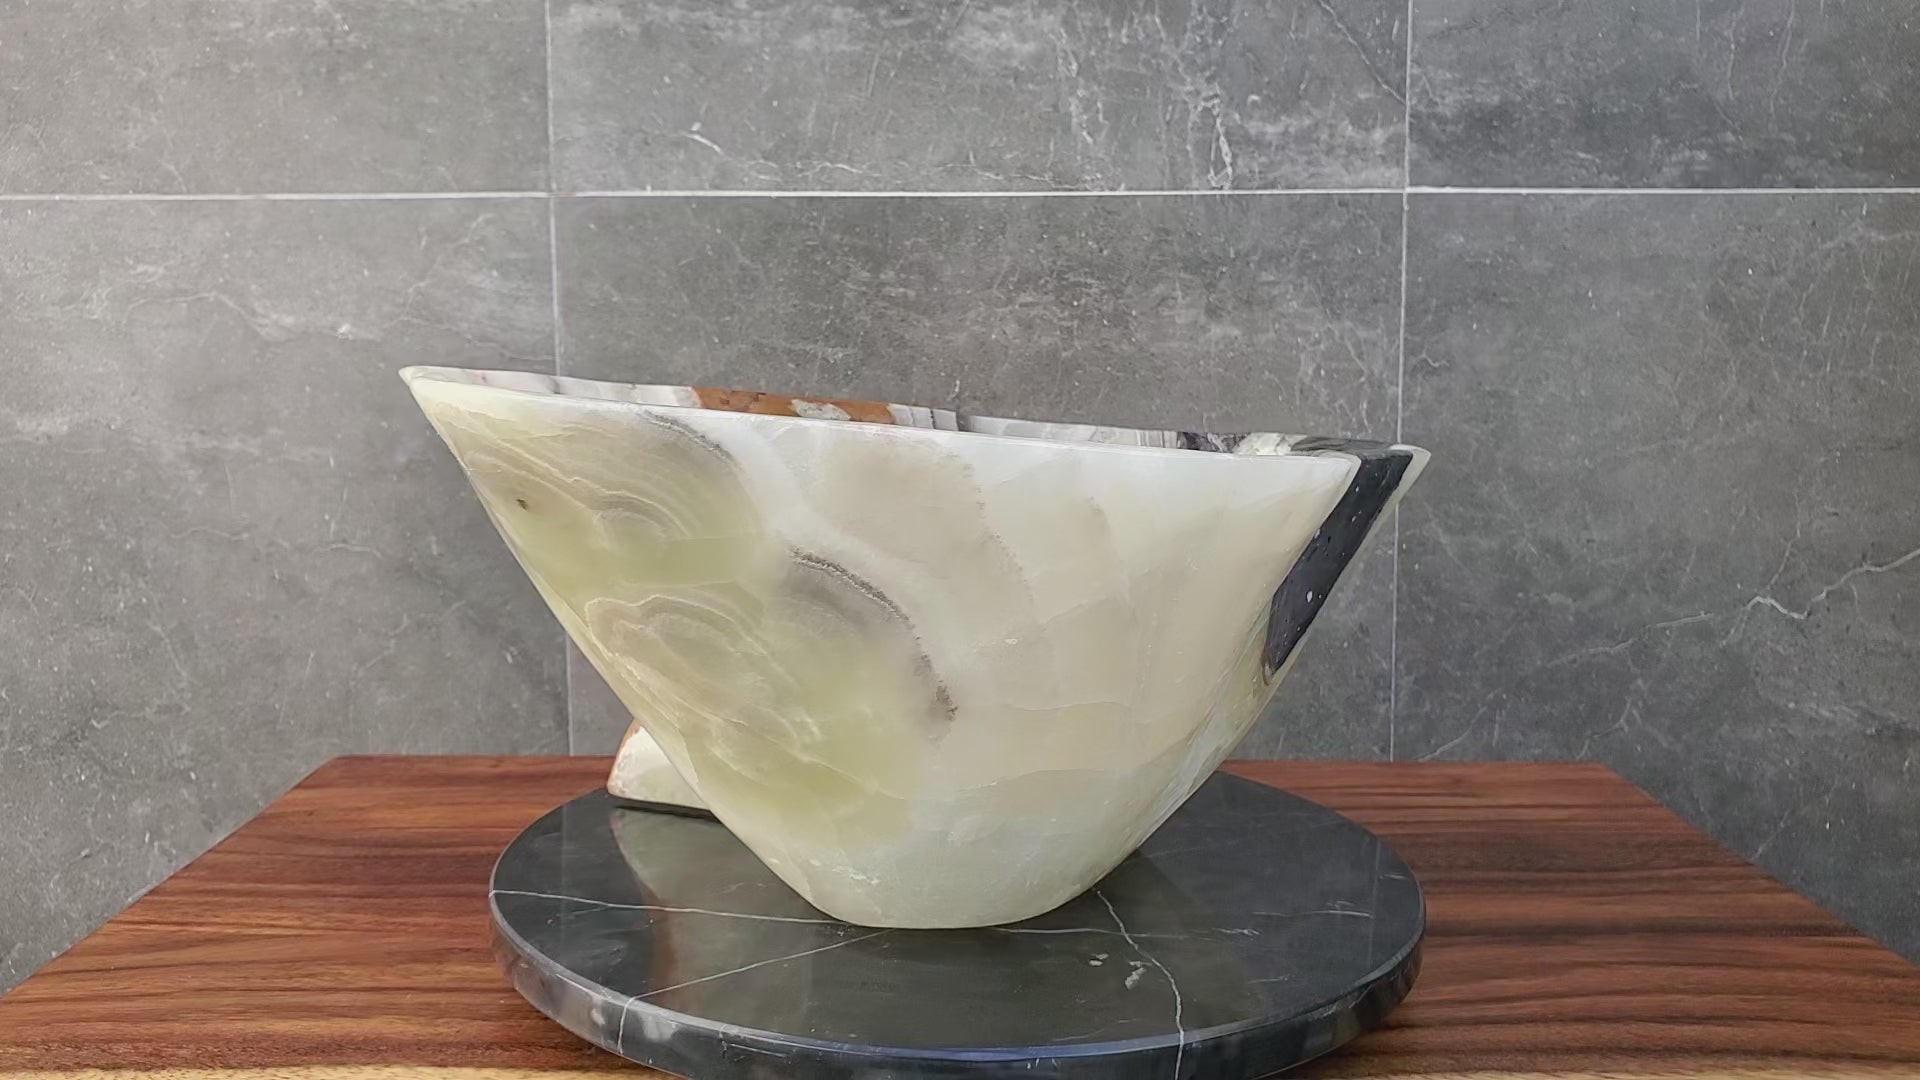 Green, Brown, and Black Onyx Vessel Sink. Handmade in Mexico. Hand Finished and Ships from The USA. Buy now at www.felipeandgrace.com.